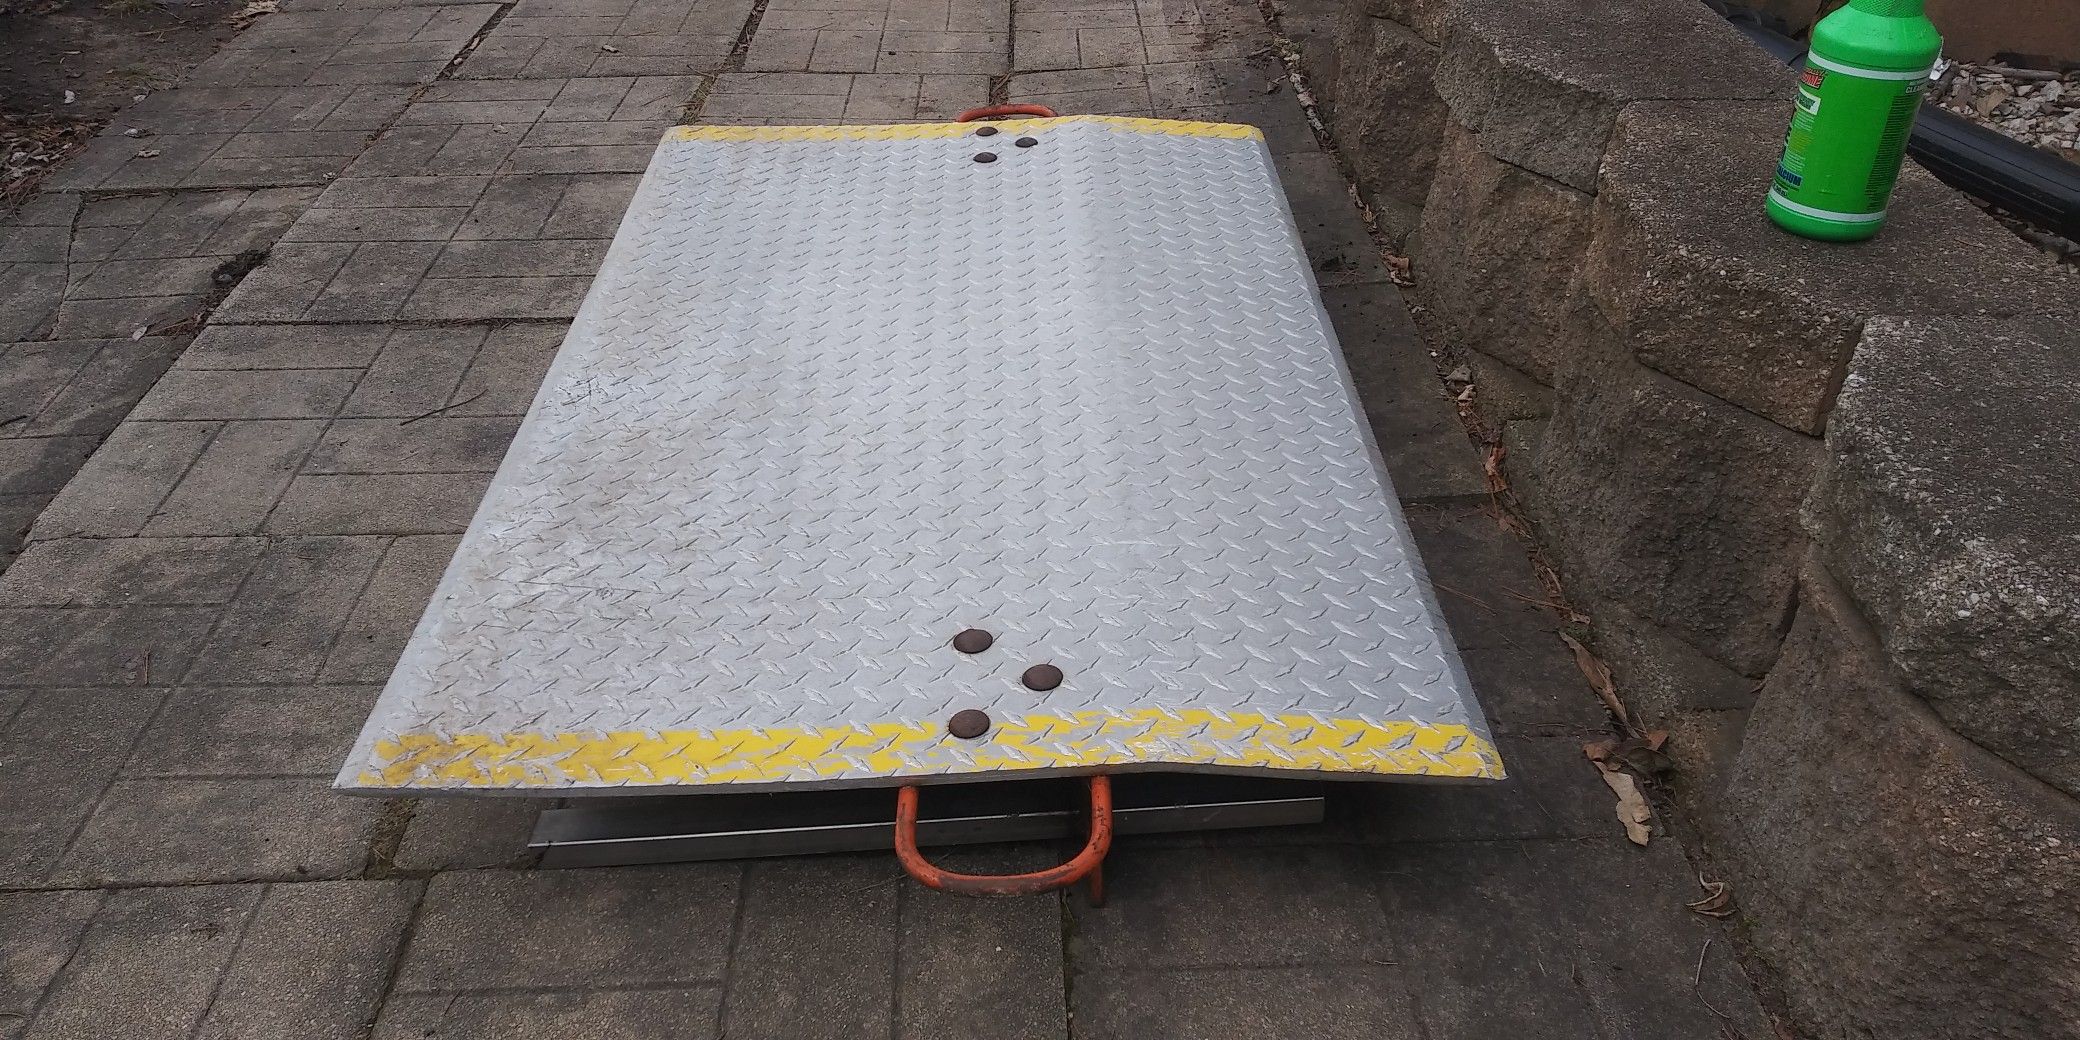 Heavy Duty Commerical Dock Plate 48"x 30" - $325 (Livonia)